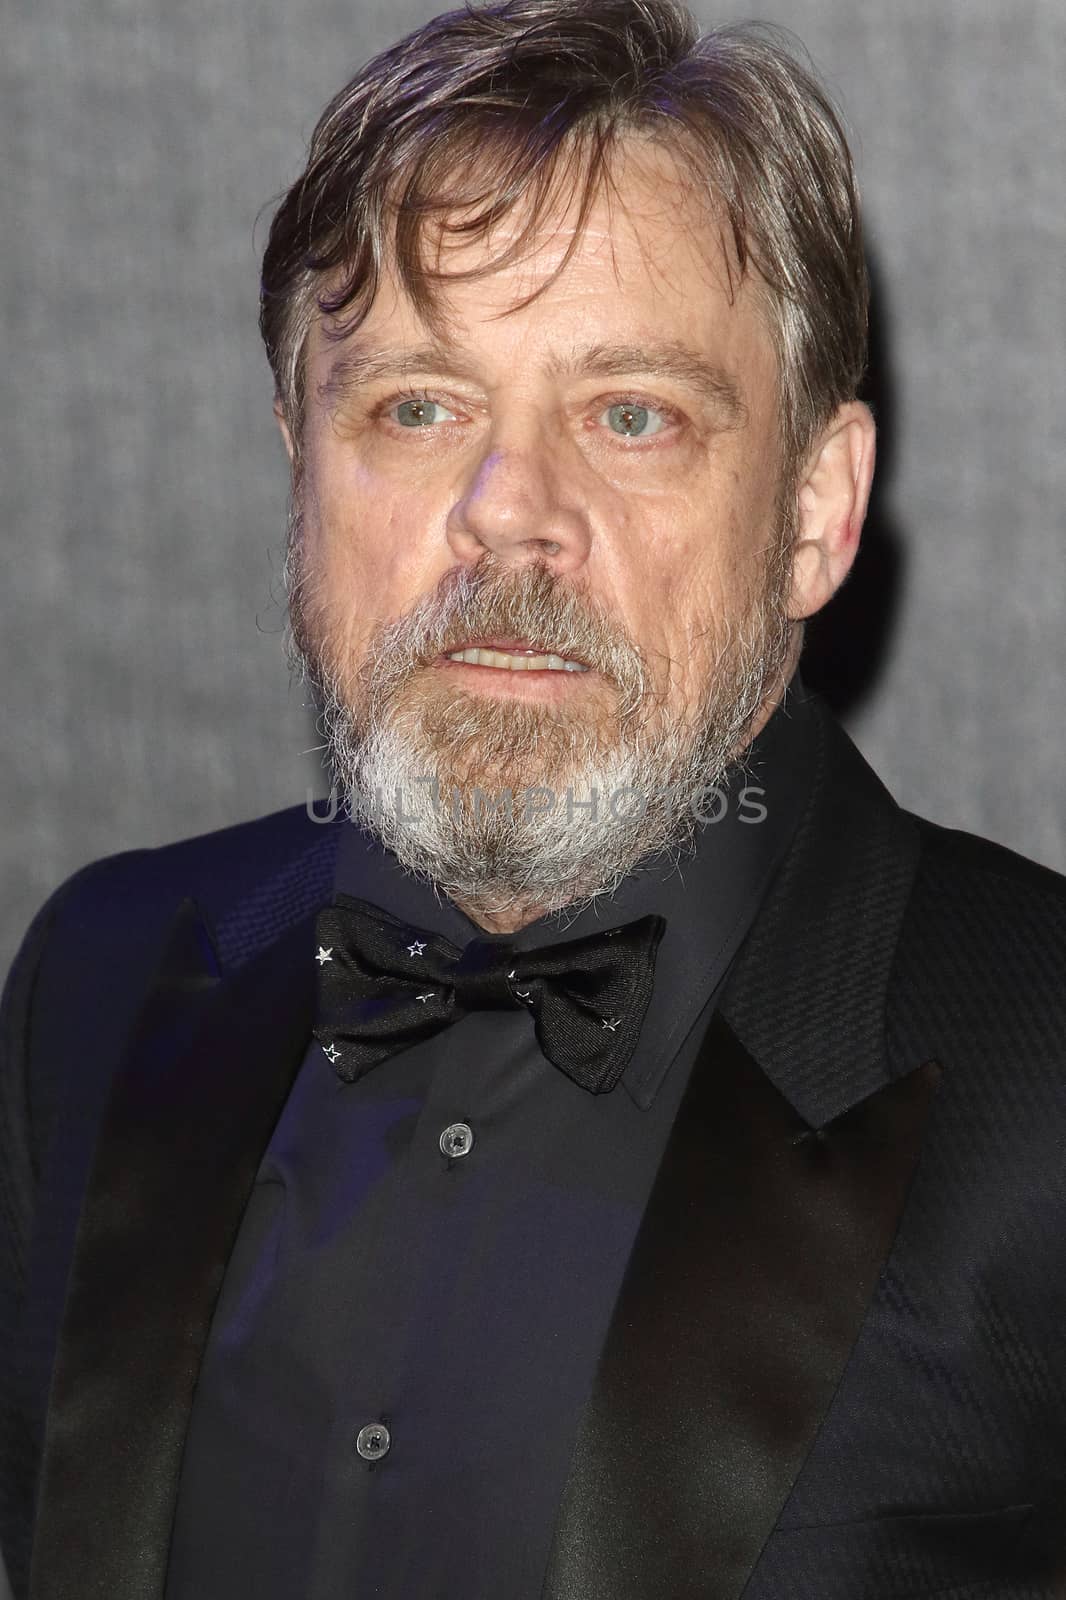 UNITED-KINGDOM, London : American Actor Mark Hamill, who plays Luke Skywalker, poses for photographers while Star Wars cast, crew and celebrities hit the red carpet for the last episode The Force Awakens European Premiere on December 16, 2015 in central London.   	